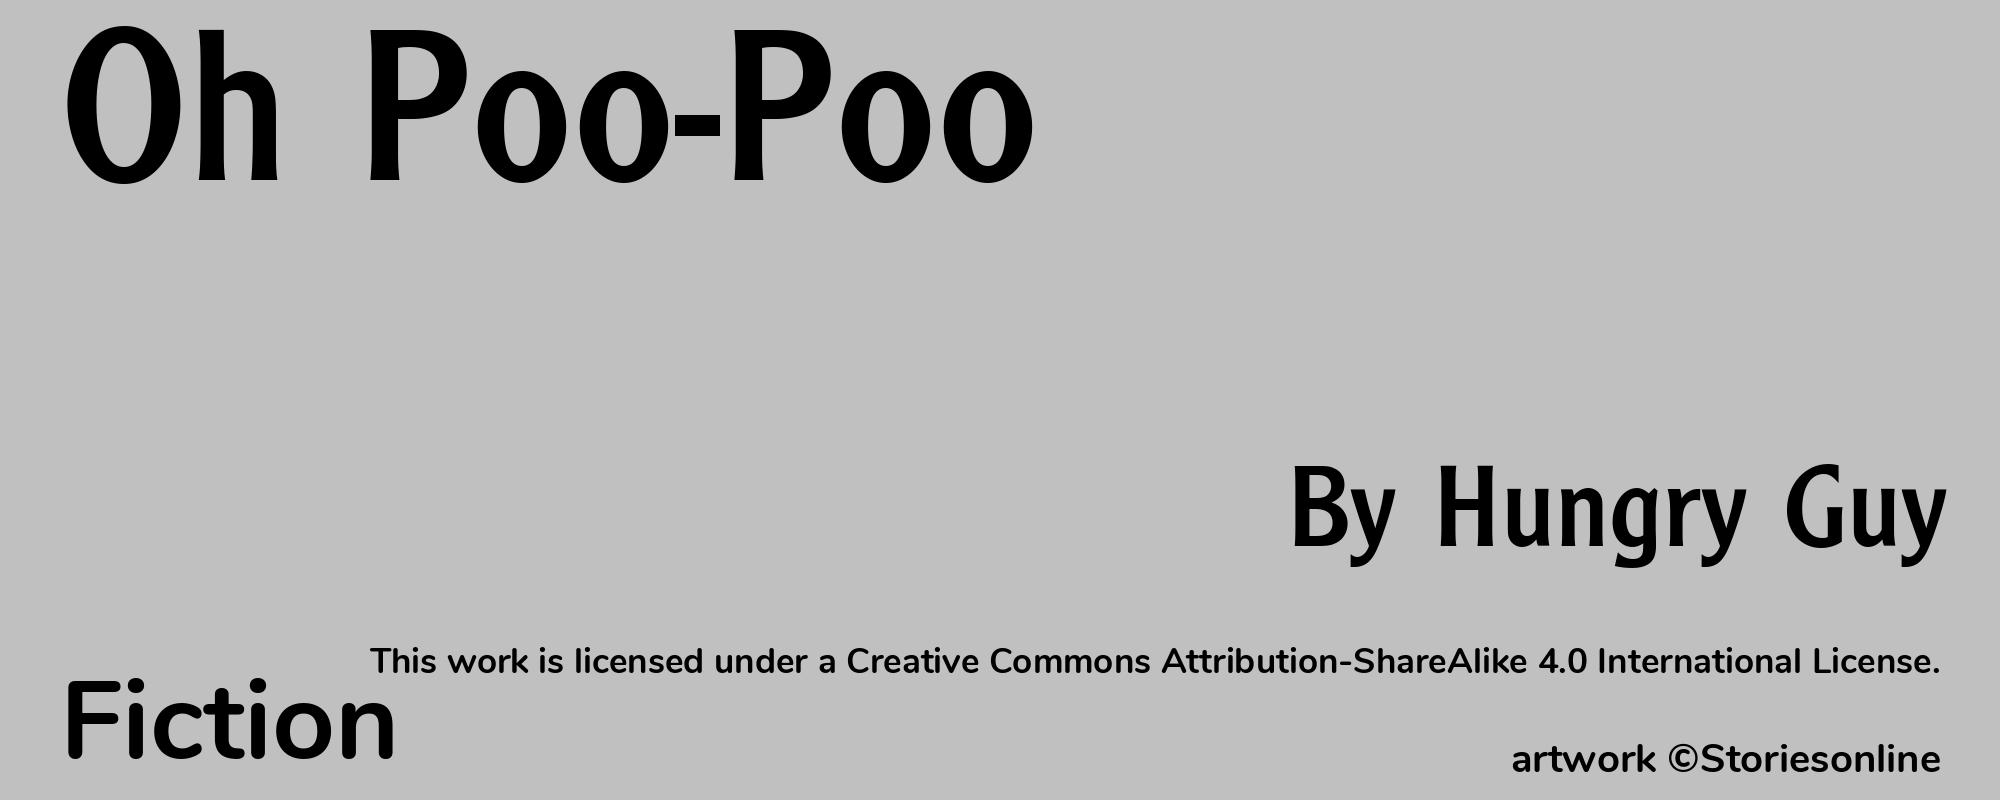 Oh Poo-Poo - Cover